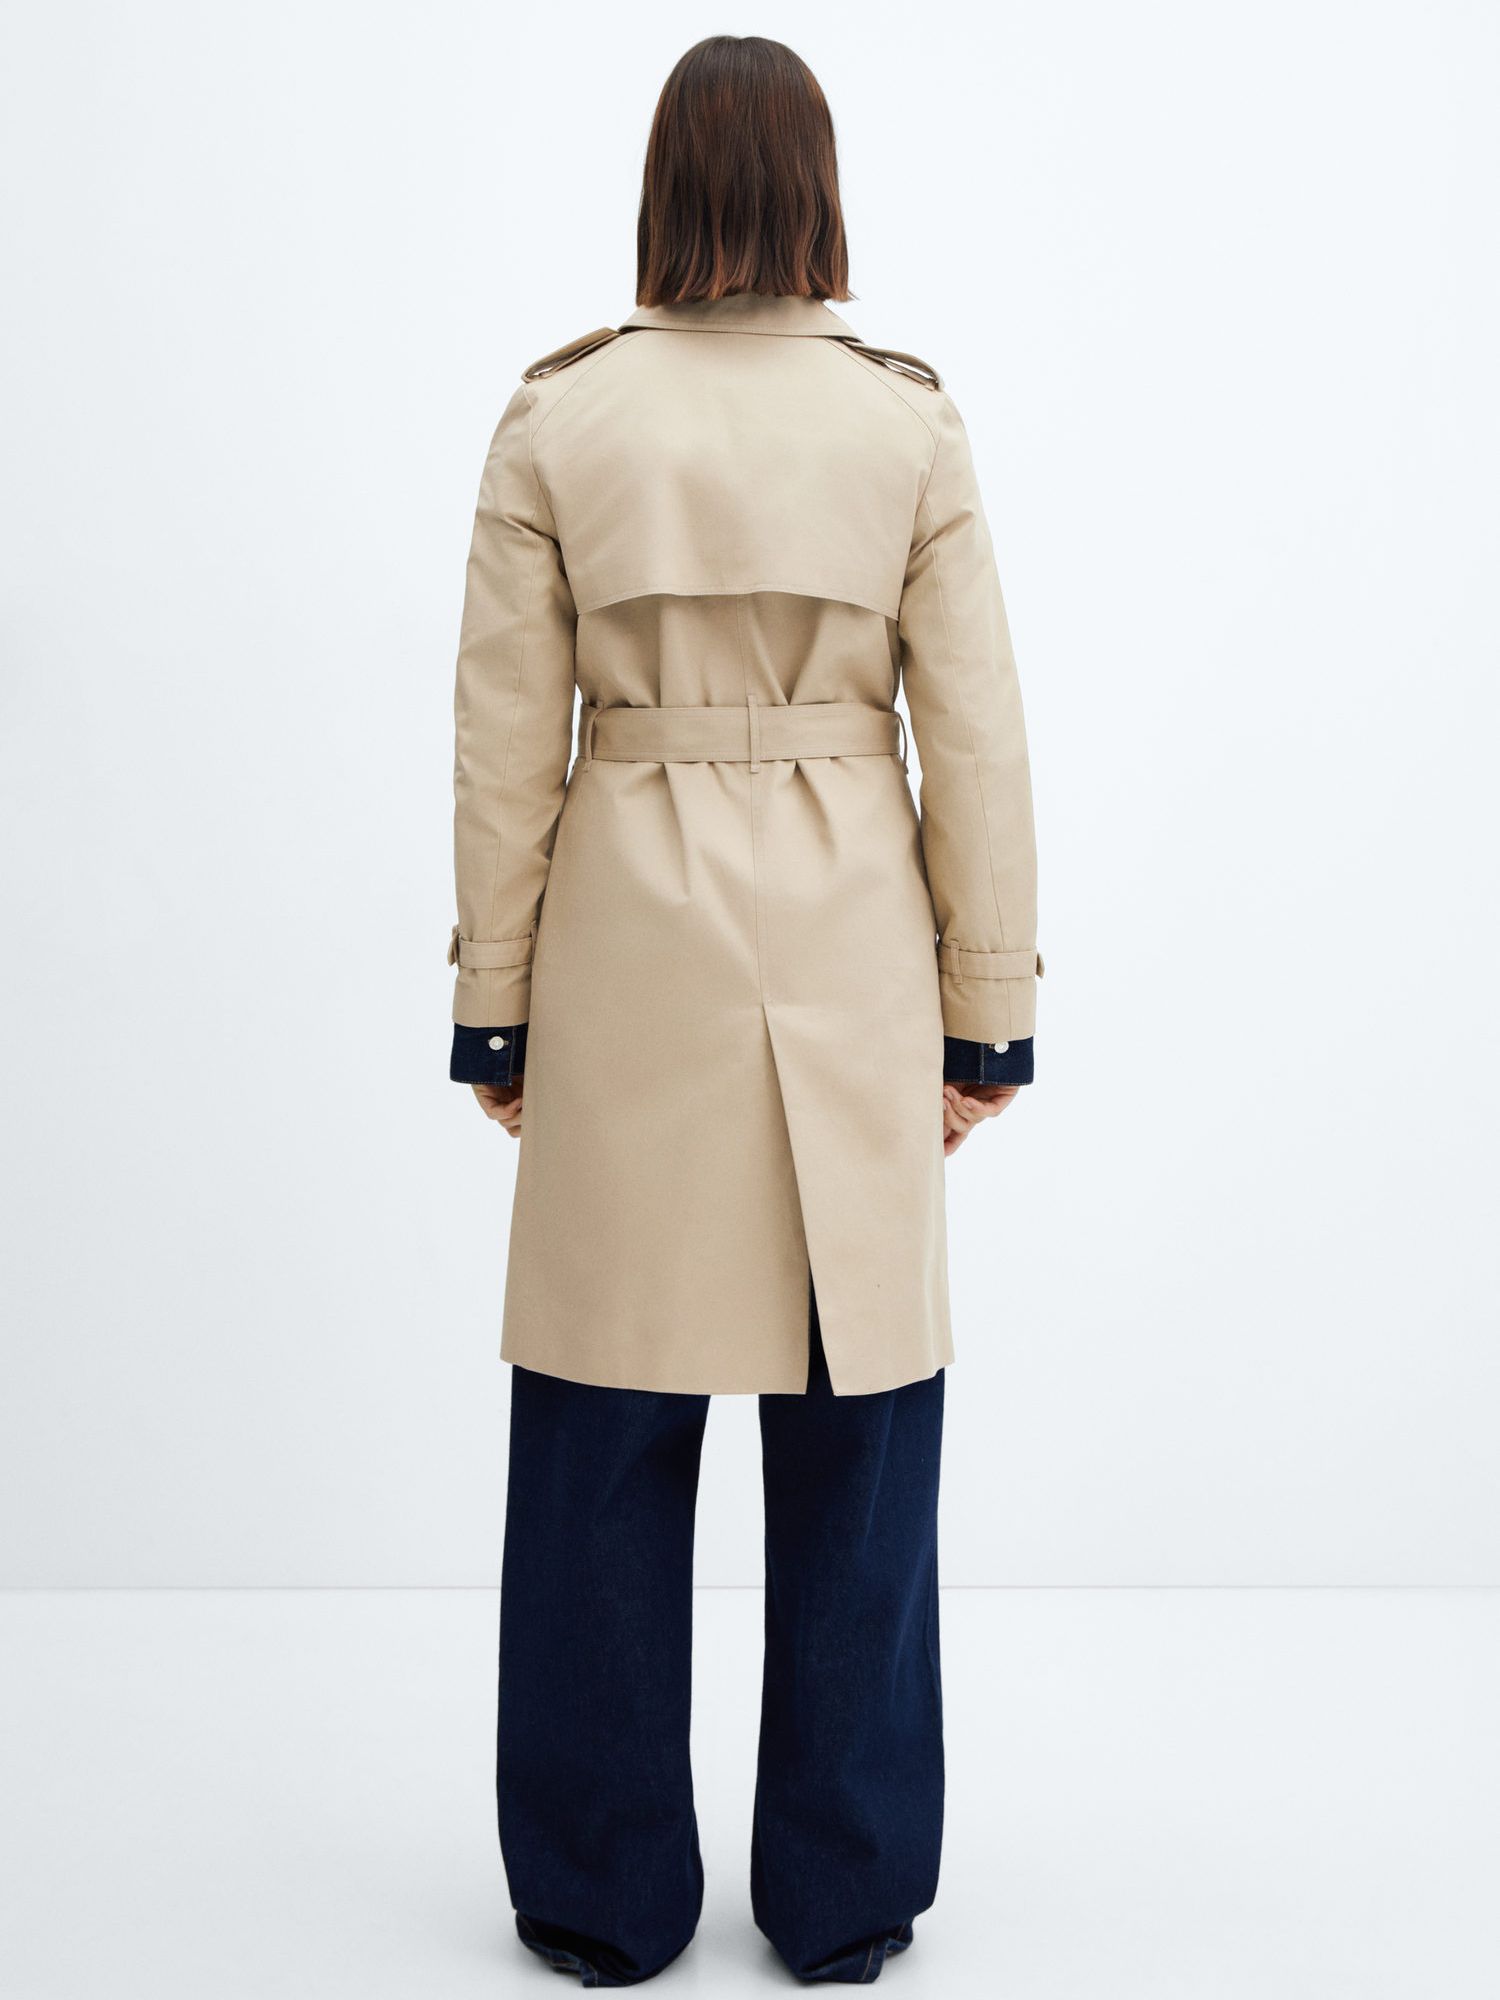 Buy Mango Polana Double Breasted Trench Coat Online at johnlewis.com